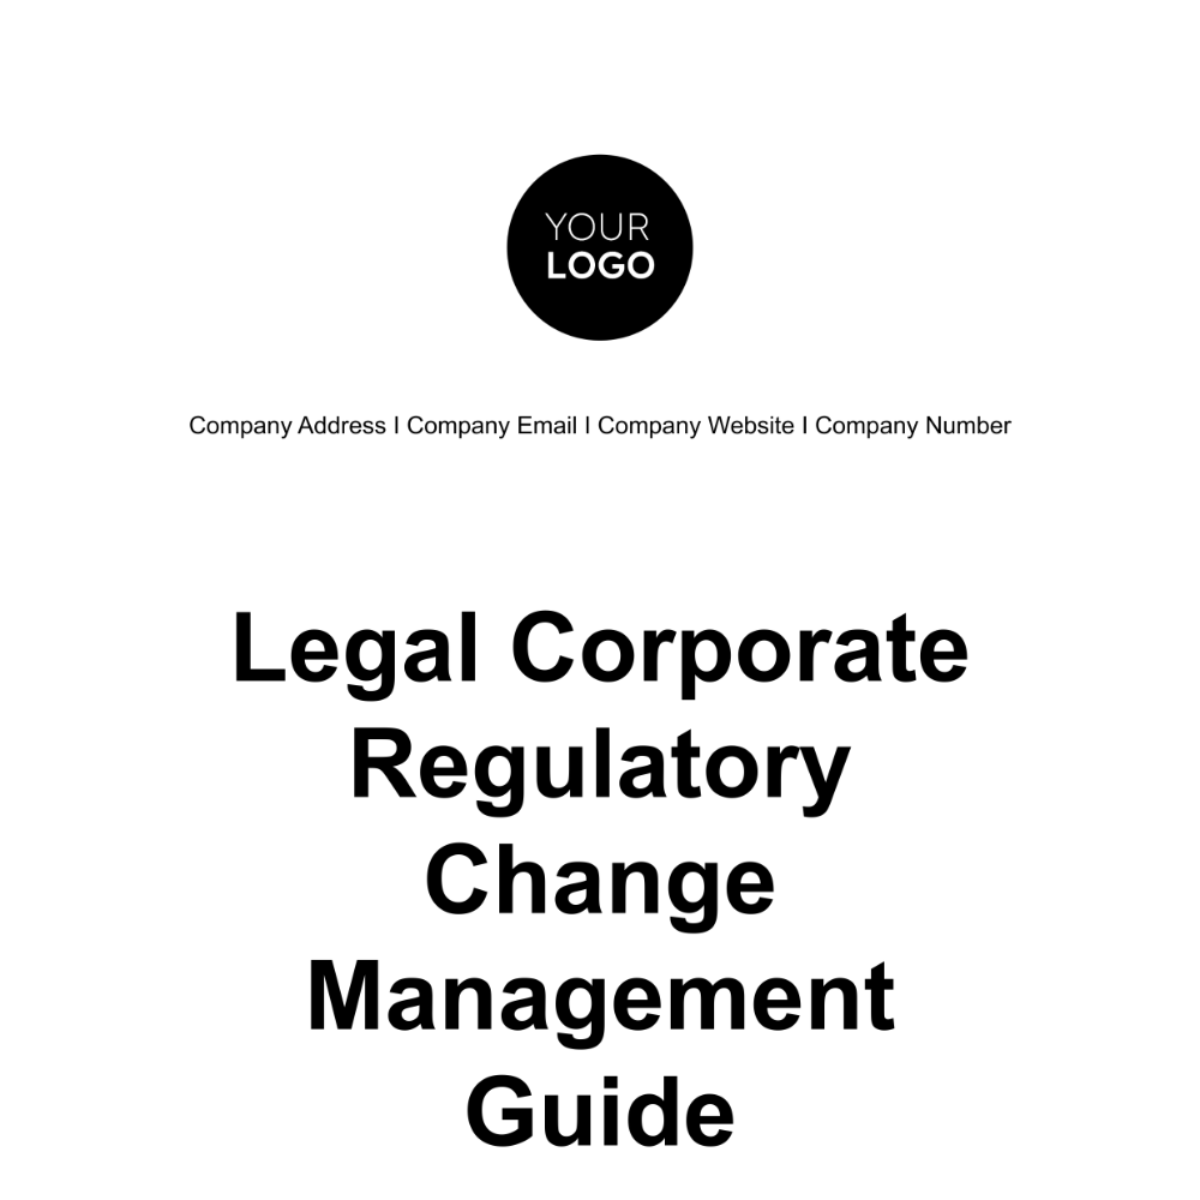 Free Legal Corporate Regulatory Change Management Guide Template